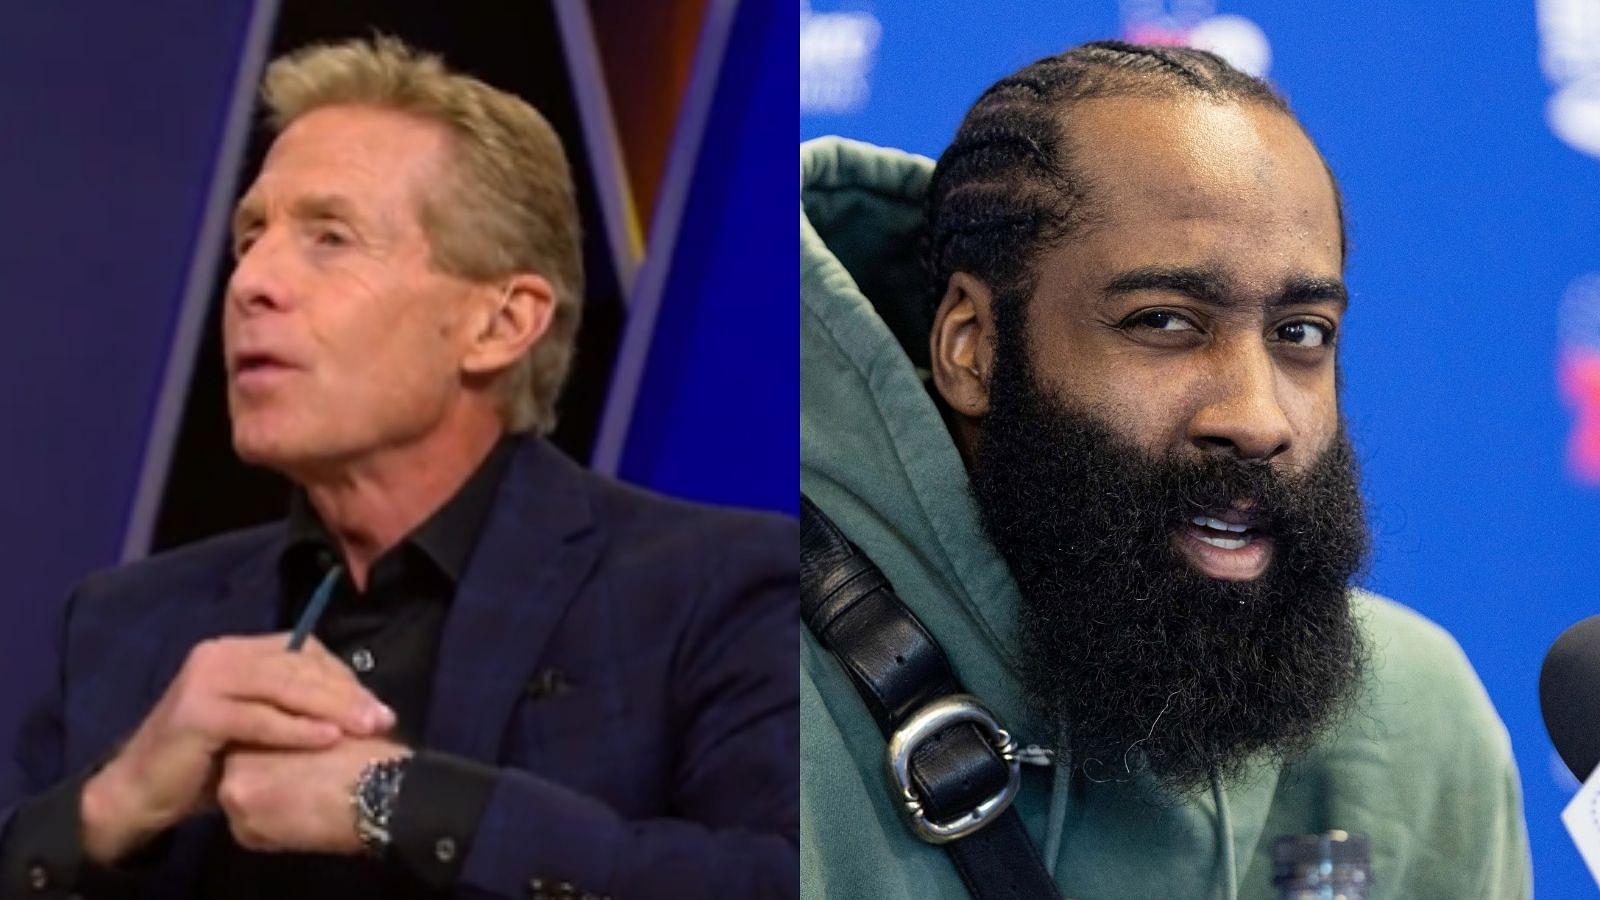 "James Harden will disappoint you or leave you flat when you least expect it": Skip Bayless goes off on former Nets star for leaving his second team high and dry just an year apart